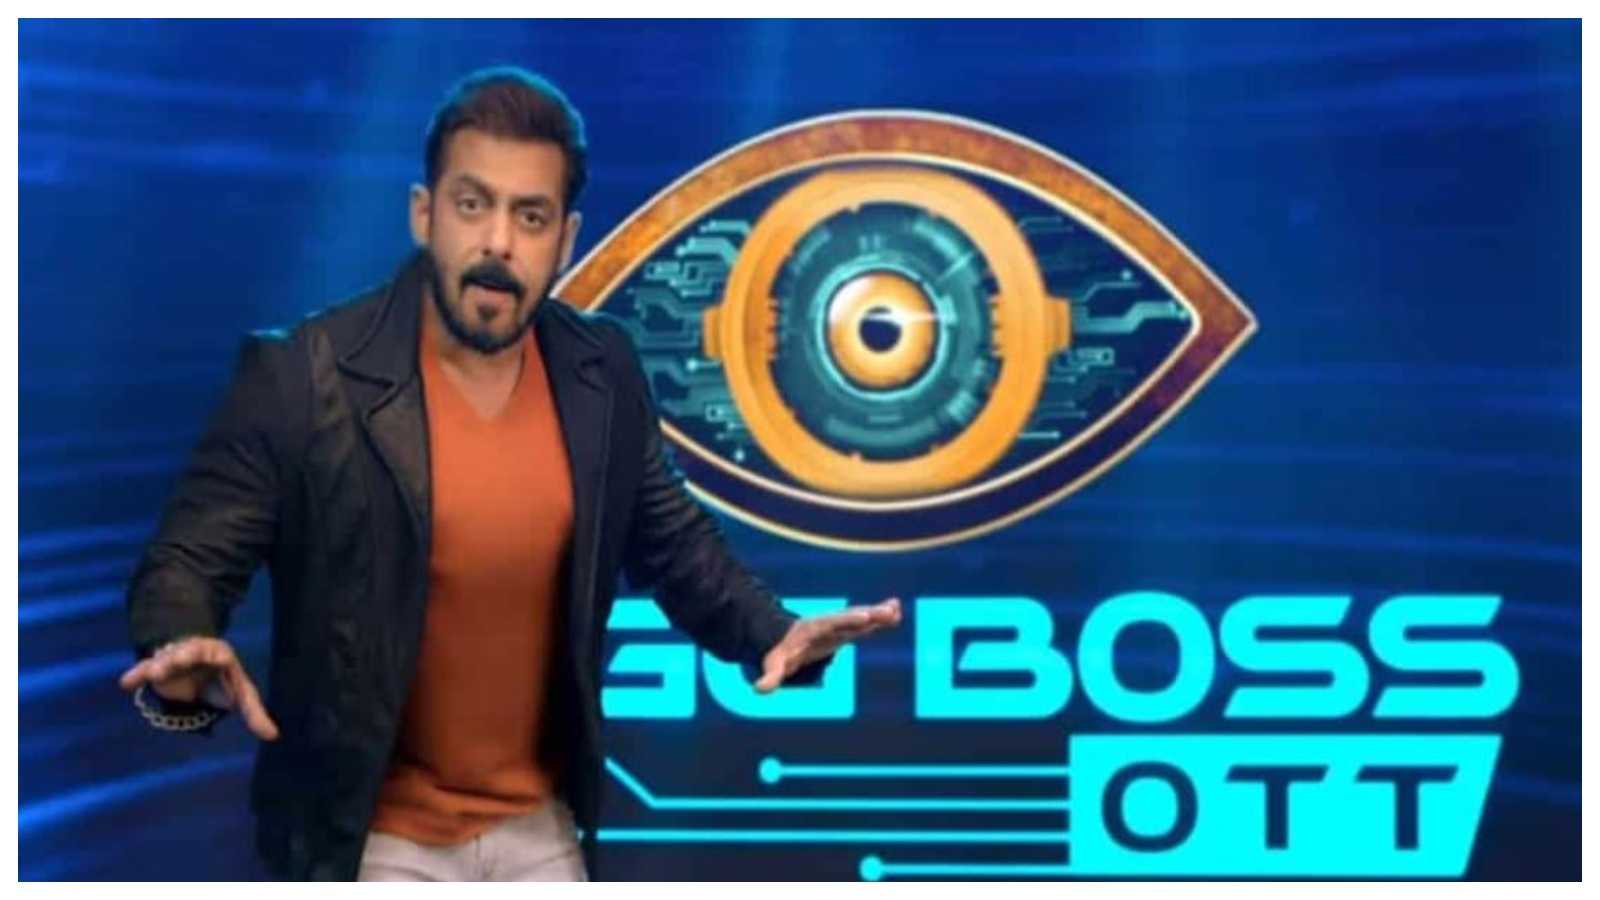 Bigg Boss OTT 2 is likely to start from THIS date with Salman Khan as host, deets inside